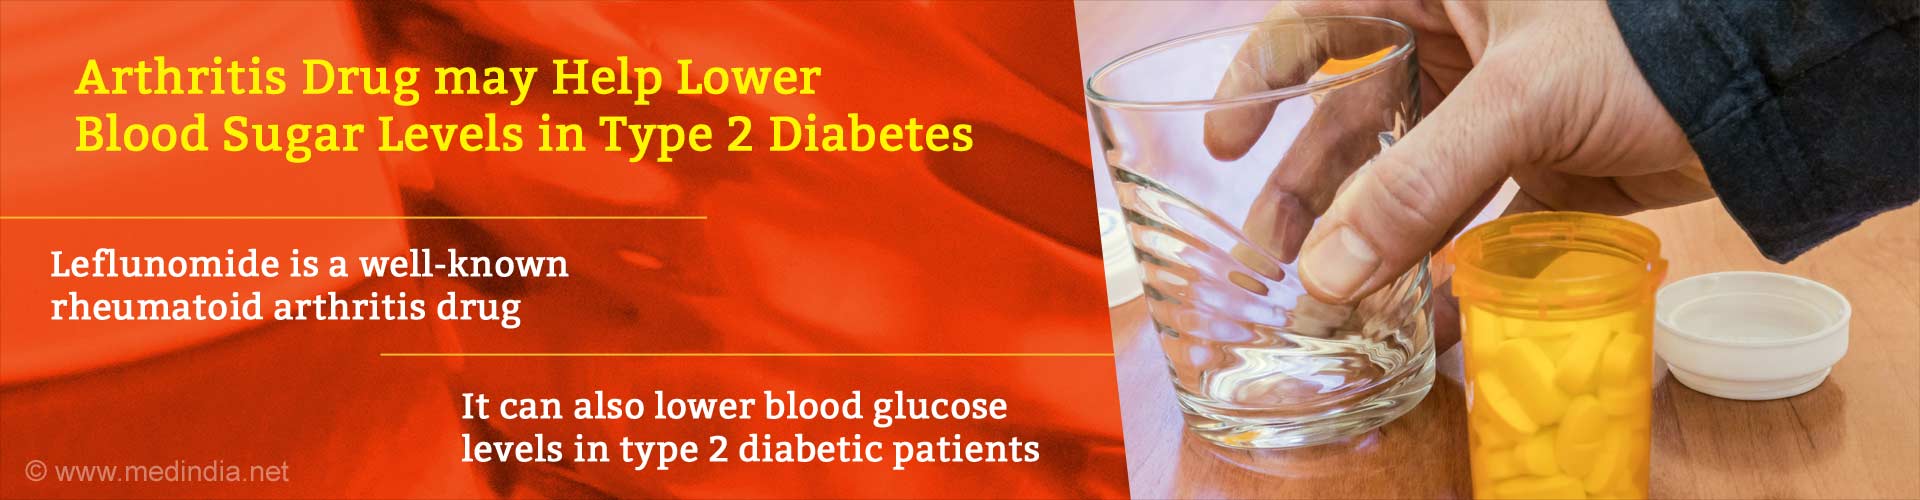 arthritis drug may help lower blood sugar levels in type 2 diabetes
- leflunomide is a well0known rheumatoid arthritis drug
- it can also lower blood glucose levels in type 2 diabetes patients
